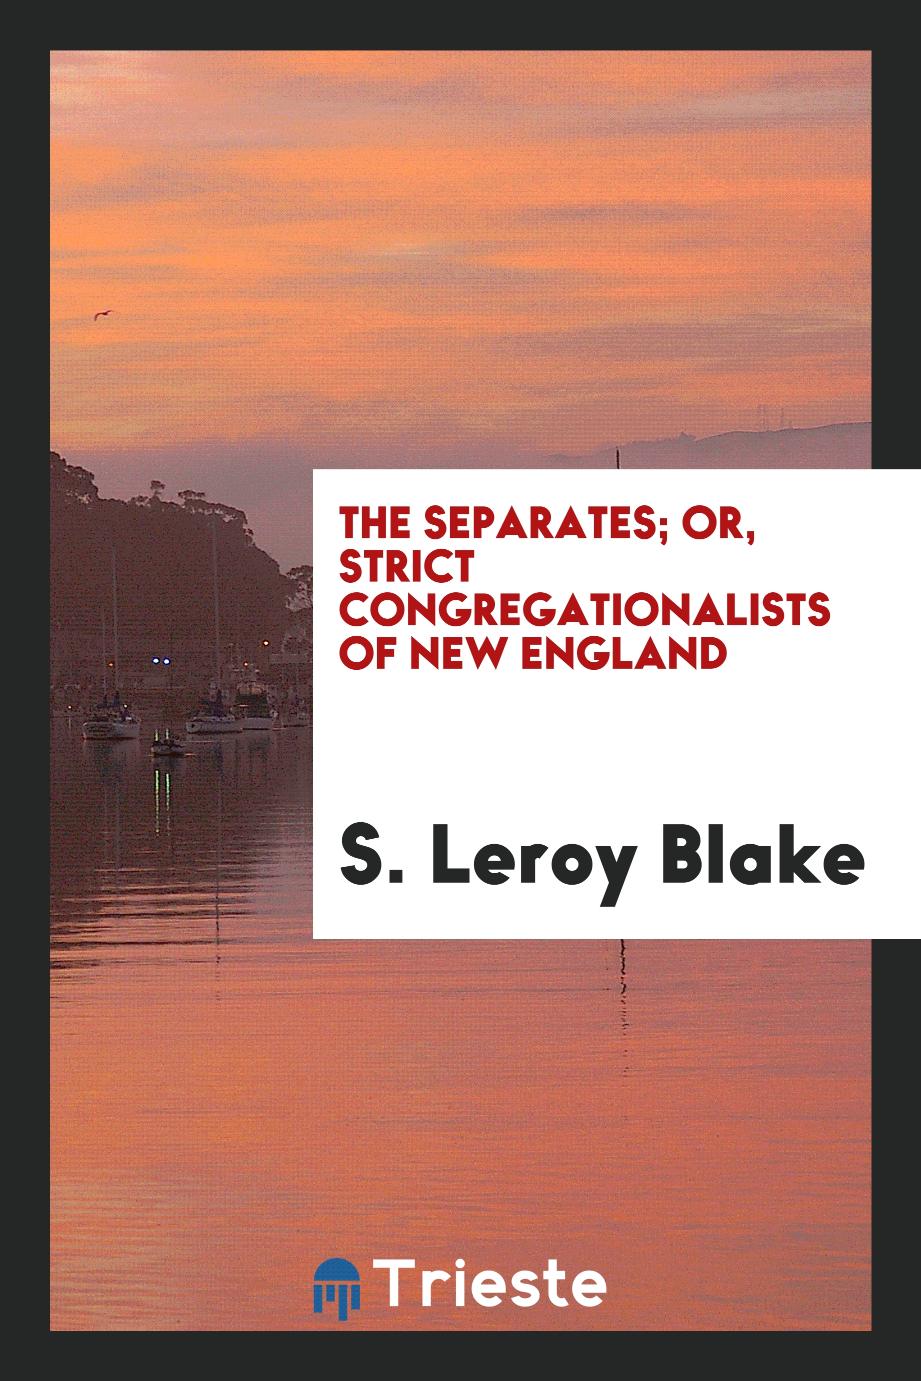 The separates; or, Strict Congregationalists of New England